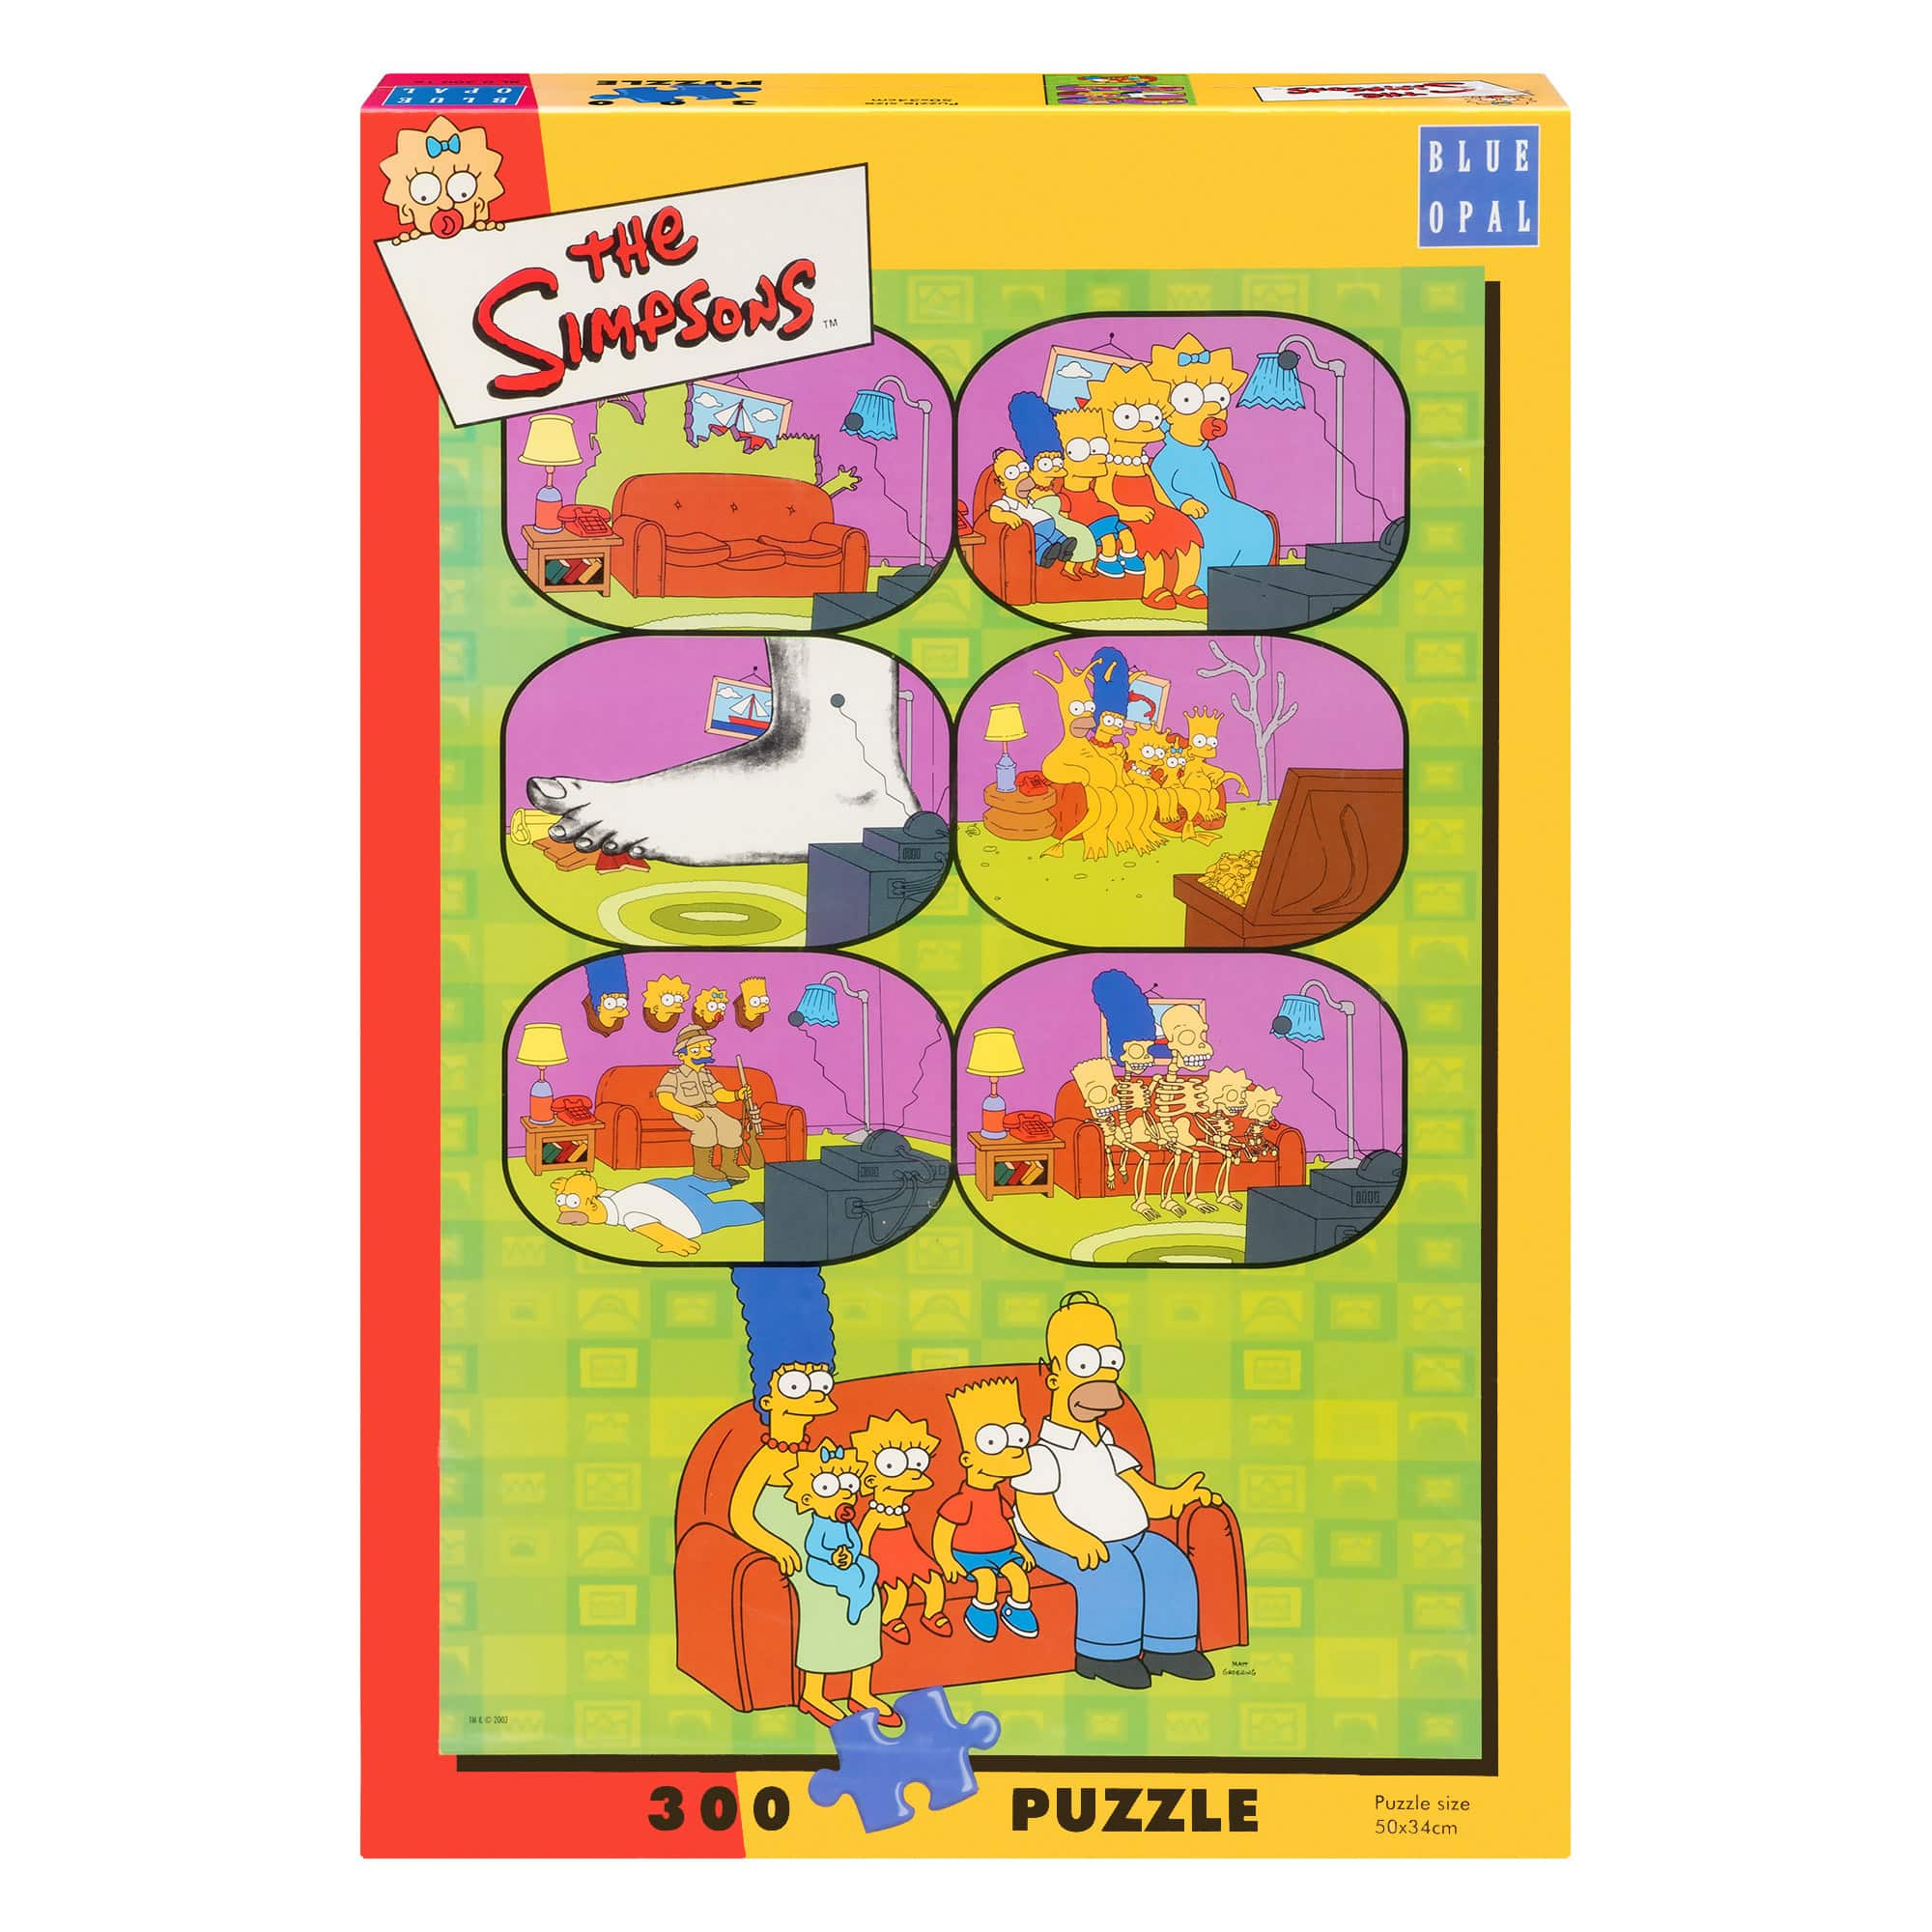 The Simpsons Couch Scenes - 300 Piece Jigsaw Puzzle